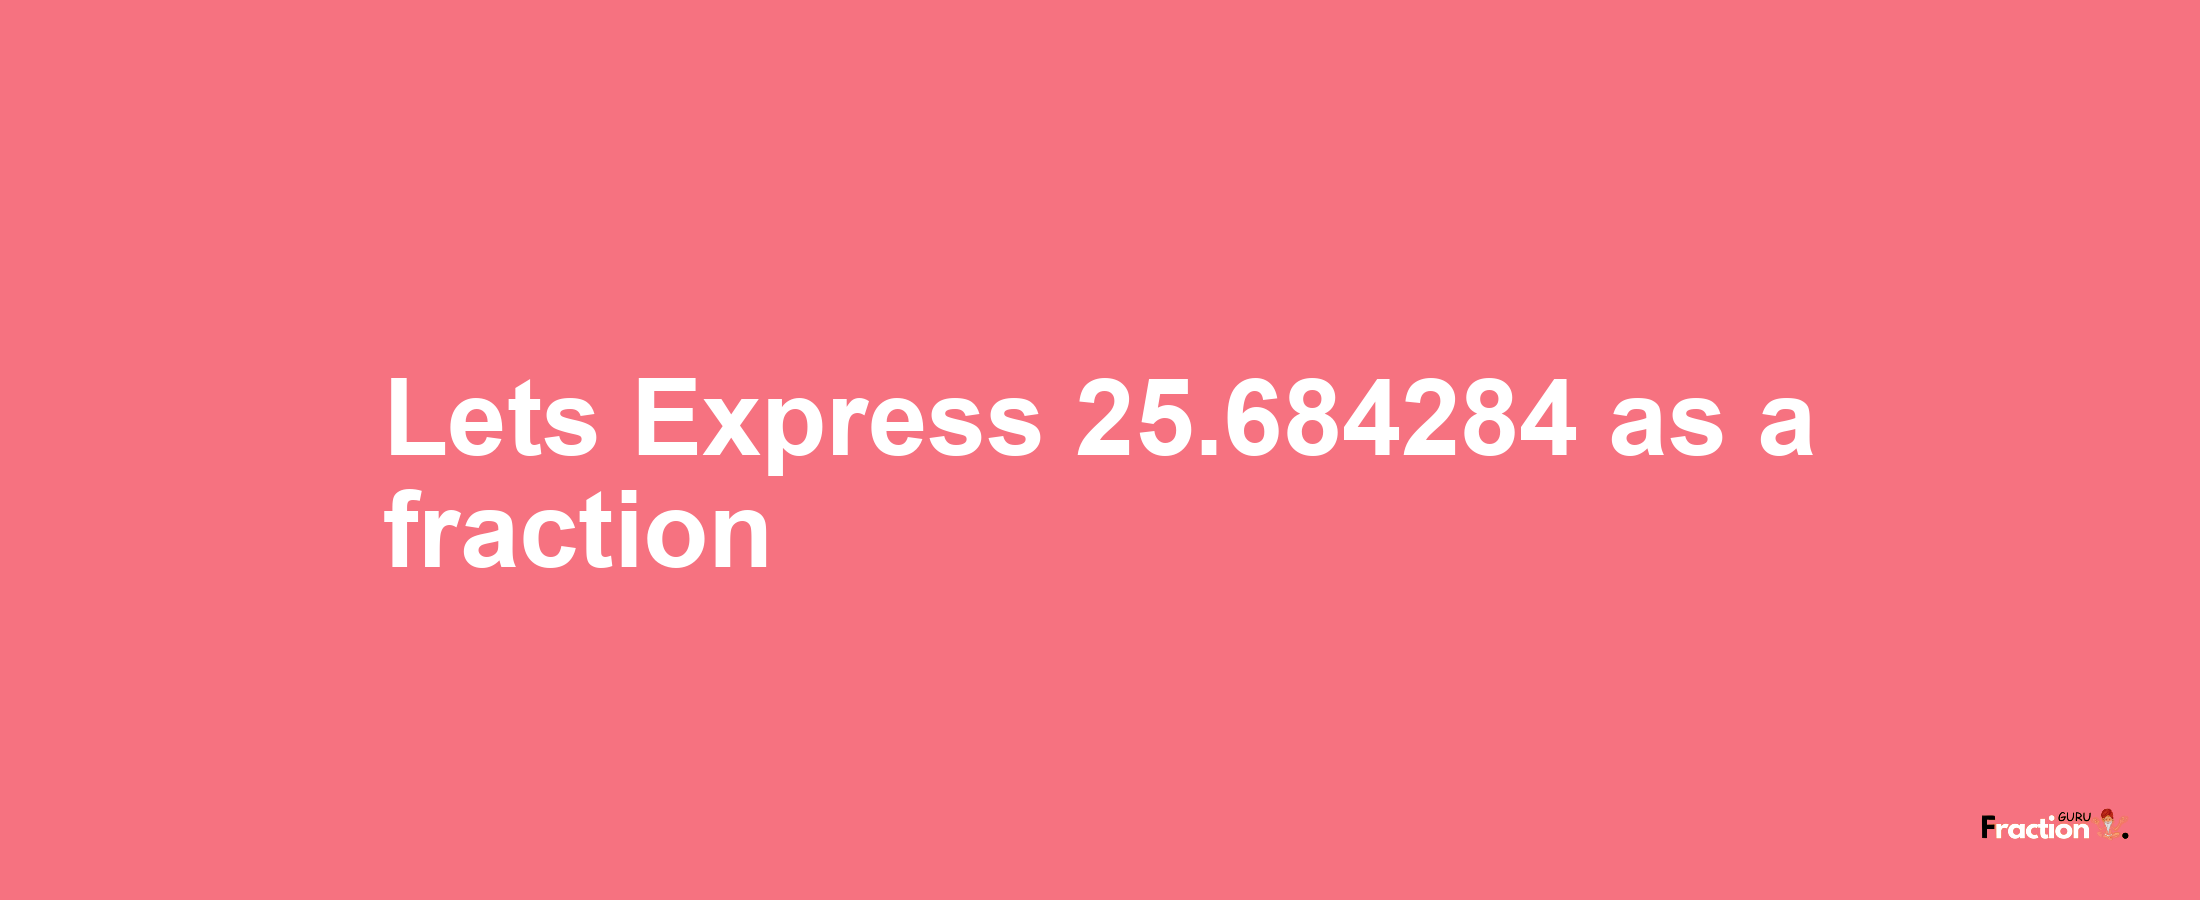 Lets Express 25.684284 as afraction